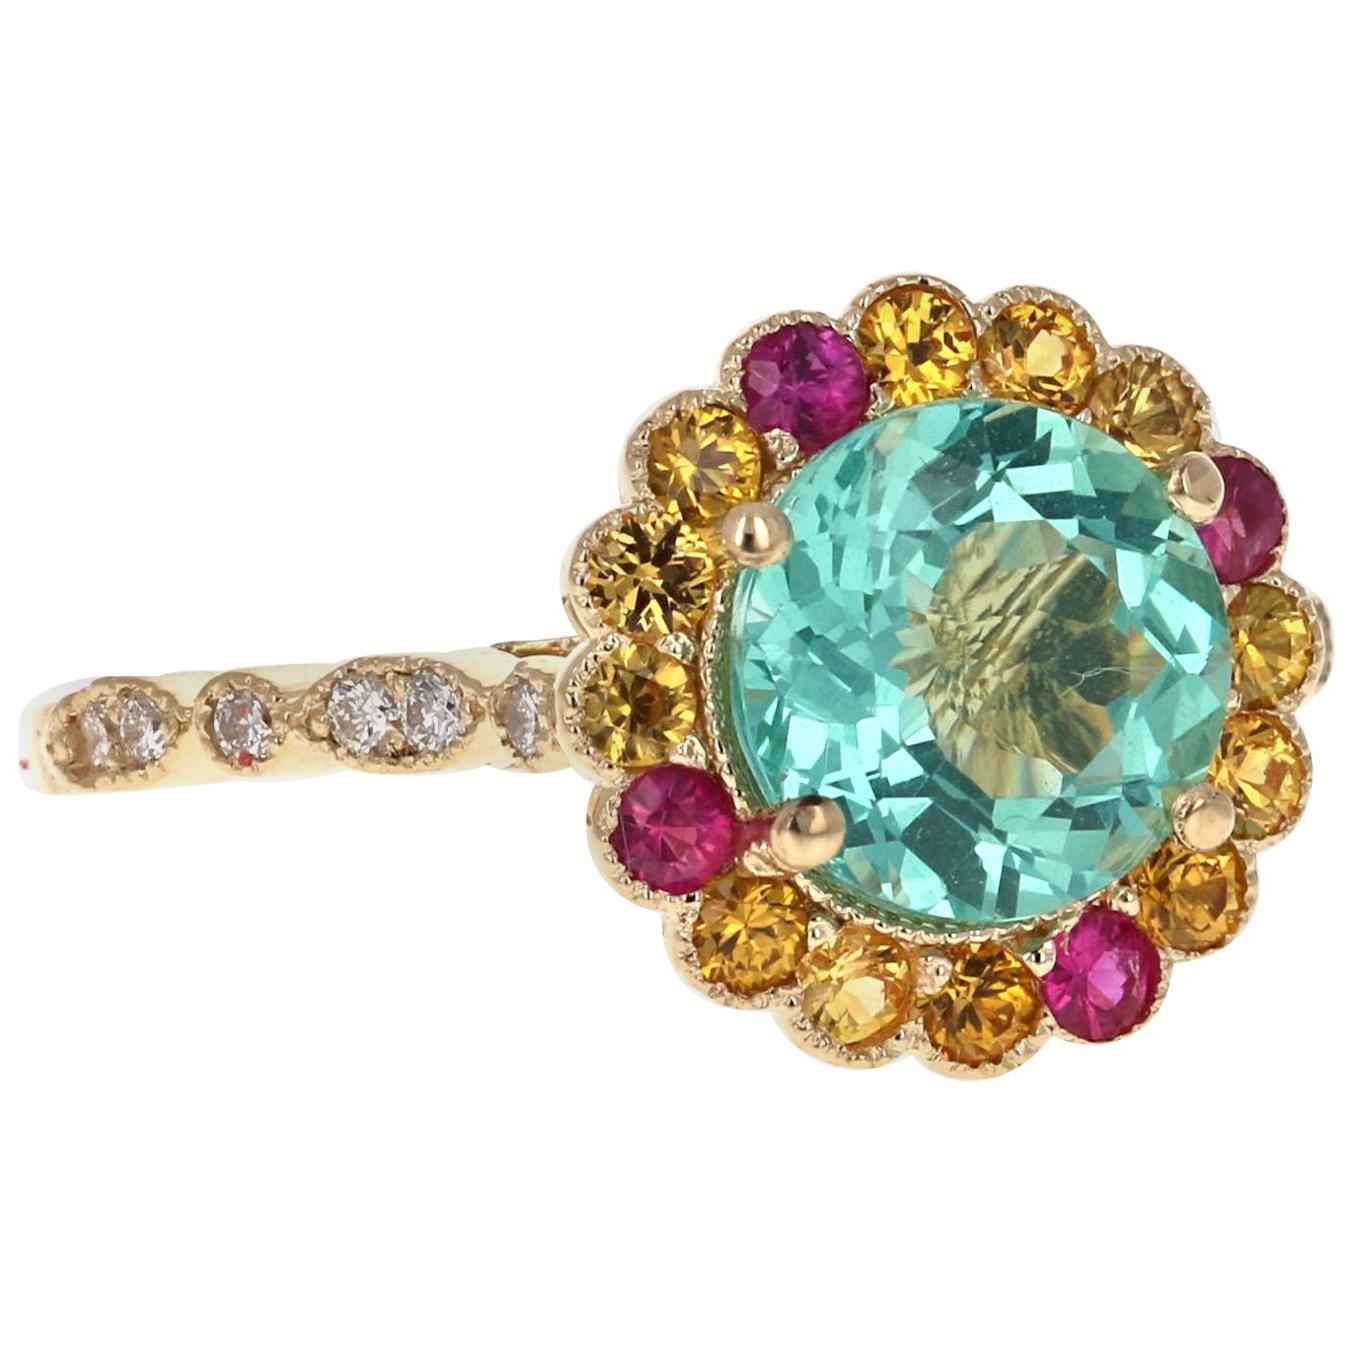 Apatite Sapphire Diamond Yellow Gold Ring

Add a little flash of color with this gorgeous Apatite, Yellow, Pink Sapphire and Diamond Ring.  This ring has a gorgeous Round Cut 2.15 carat Apatite in the center of the ring and is surrounded by a row of